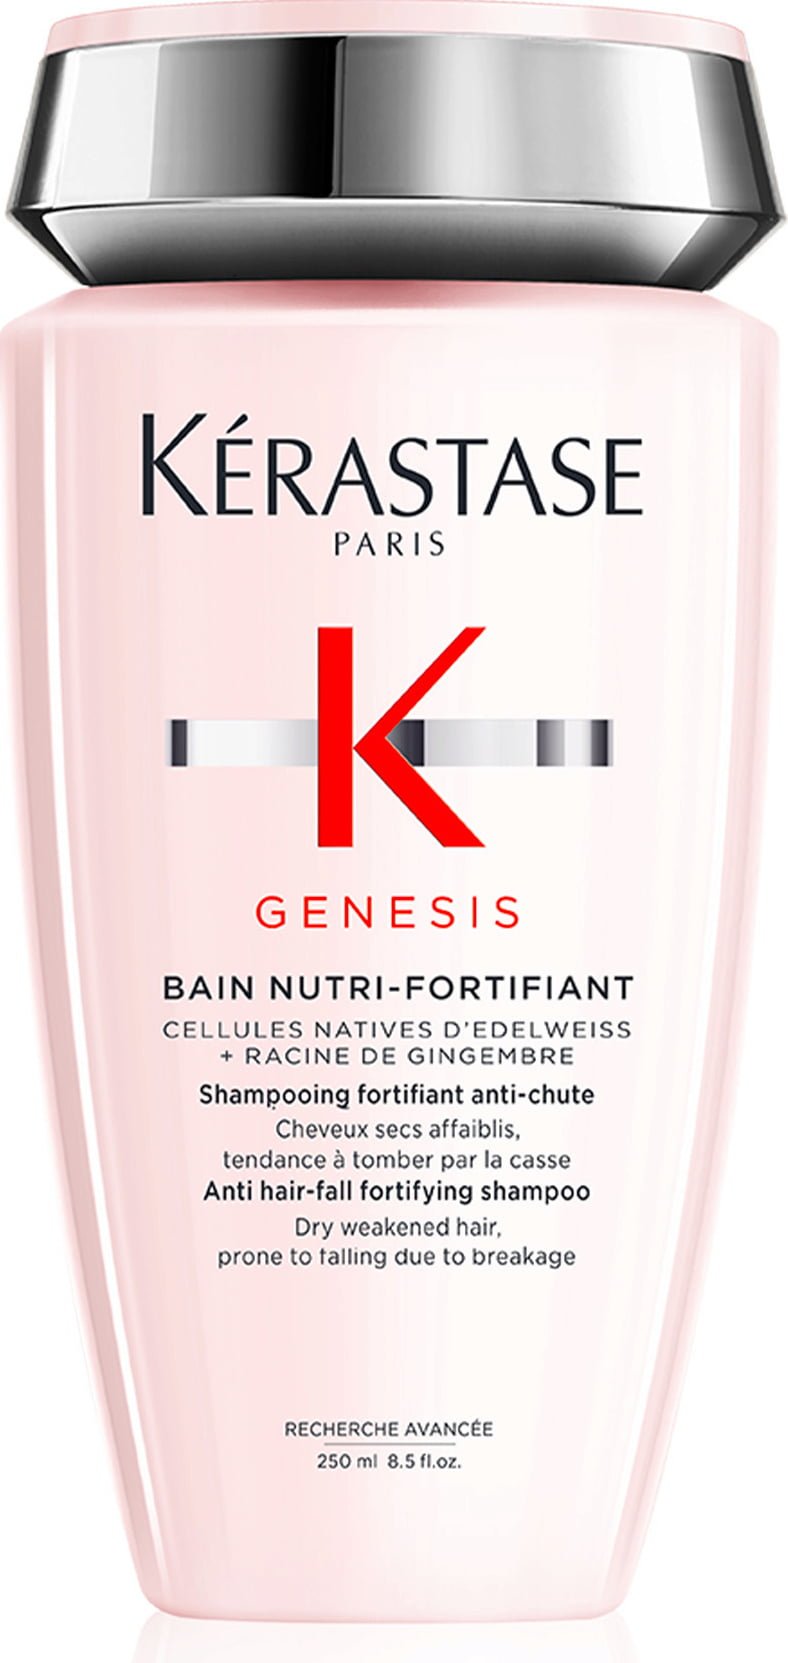 Genesis Bain Nutri-Fortifiant Shampoo for Normal to Dry Hair 250 Ml - IZZAT DAOUK SA